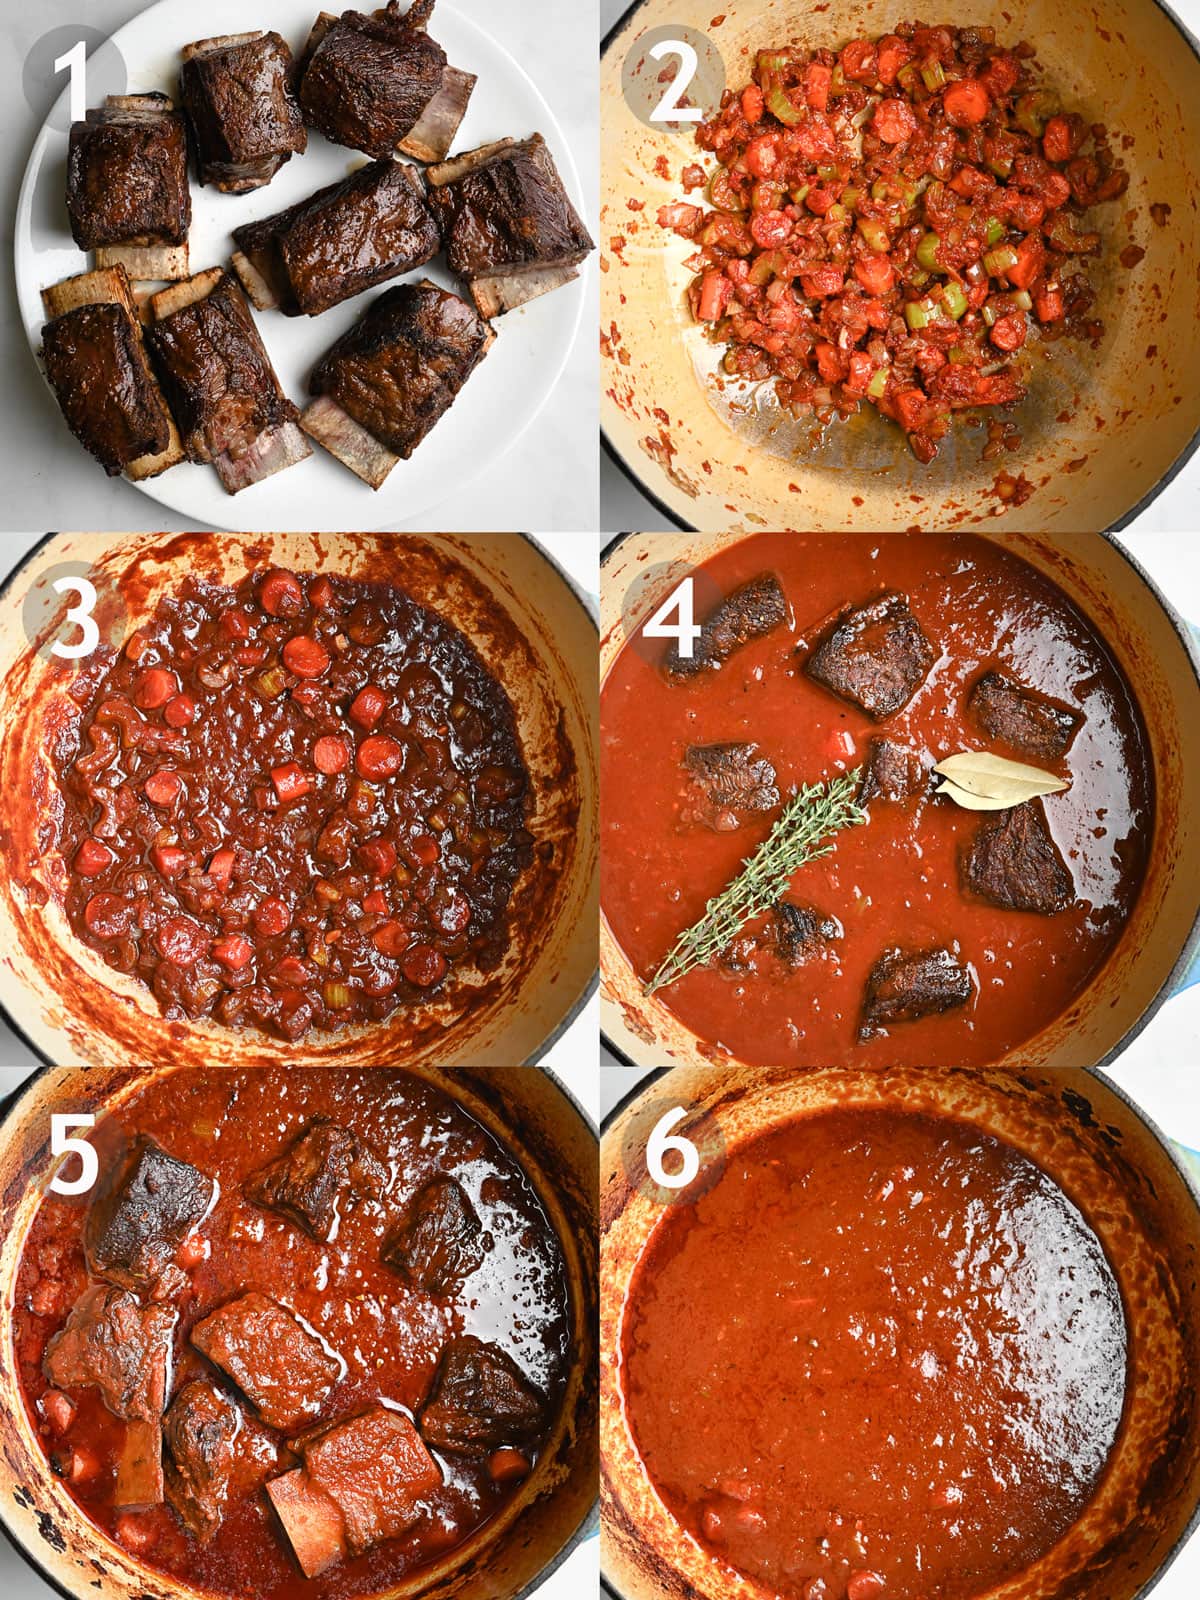 Steps to make Italian Short Ribs including searing the meat, sauteing onions, carrots and celery, adding tomato paste and wine and braising until ribs are cooked through.